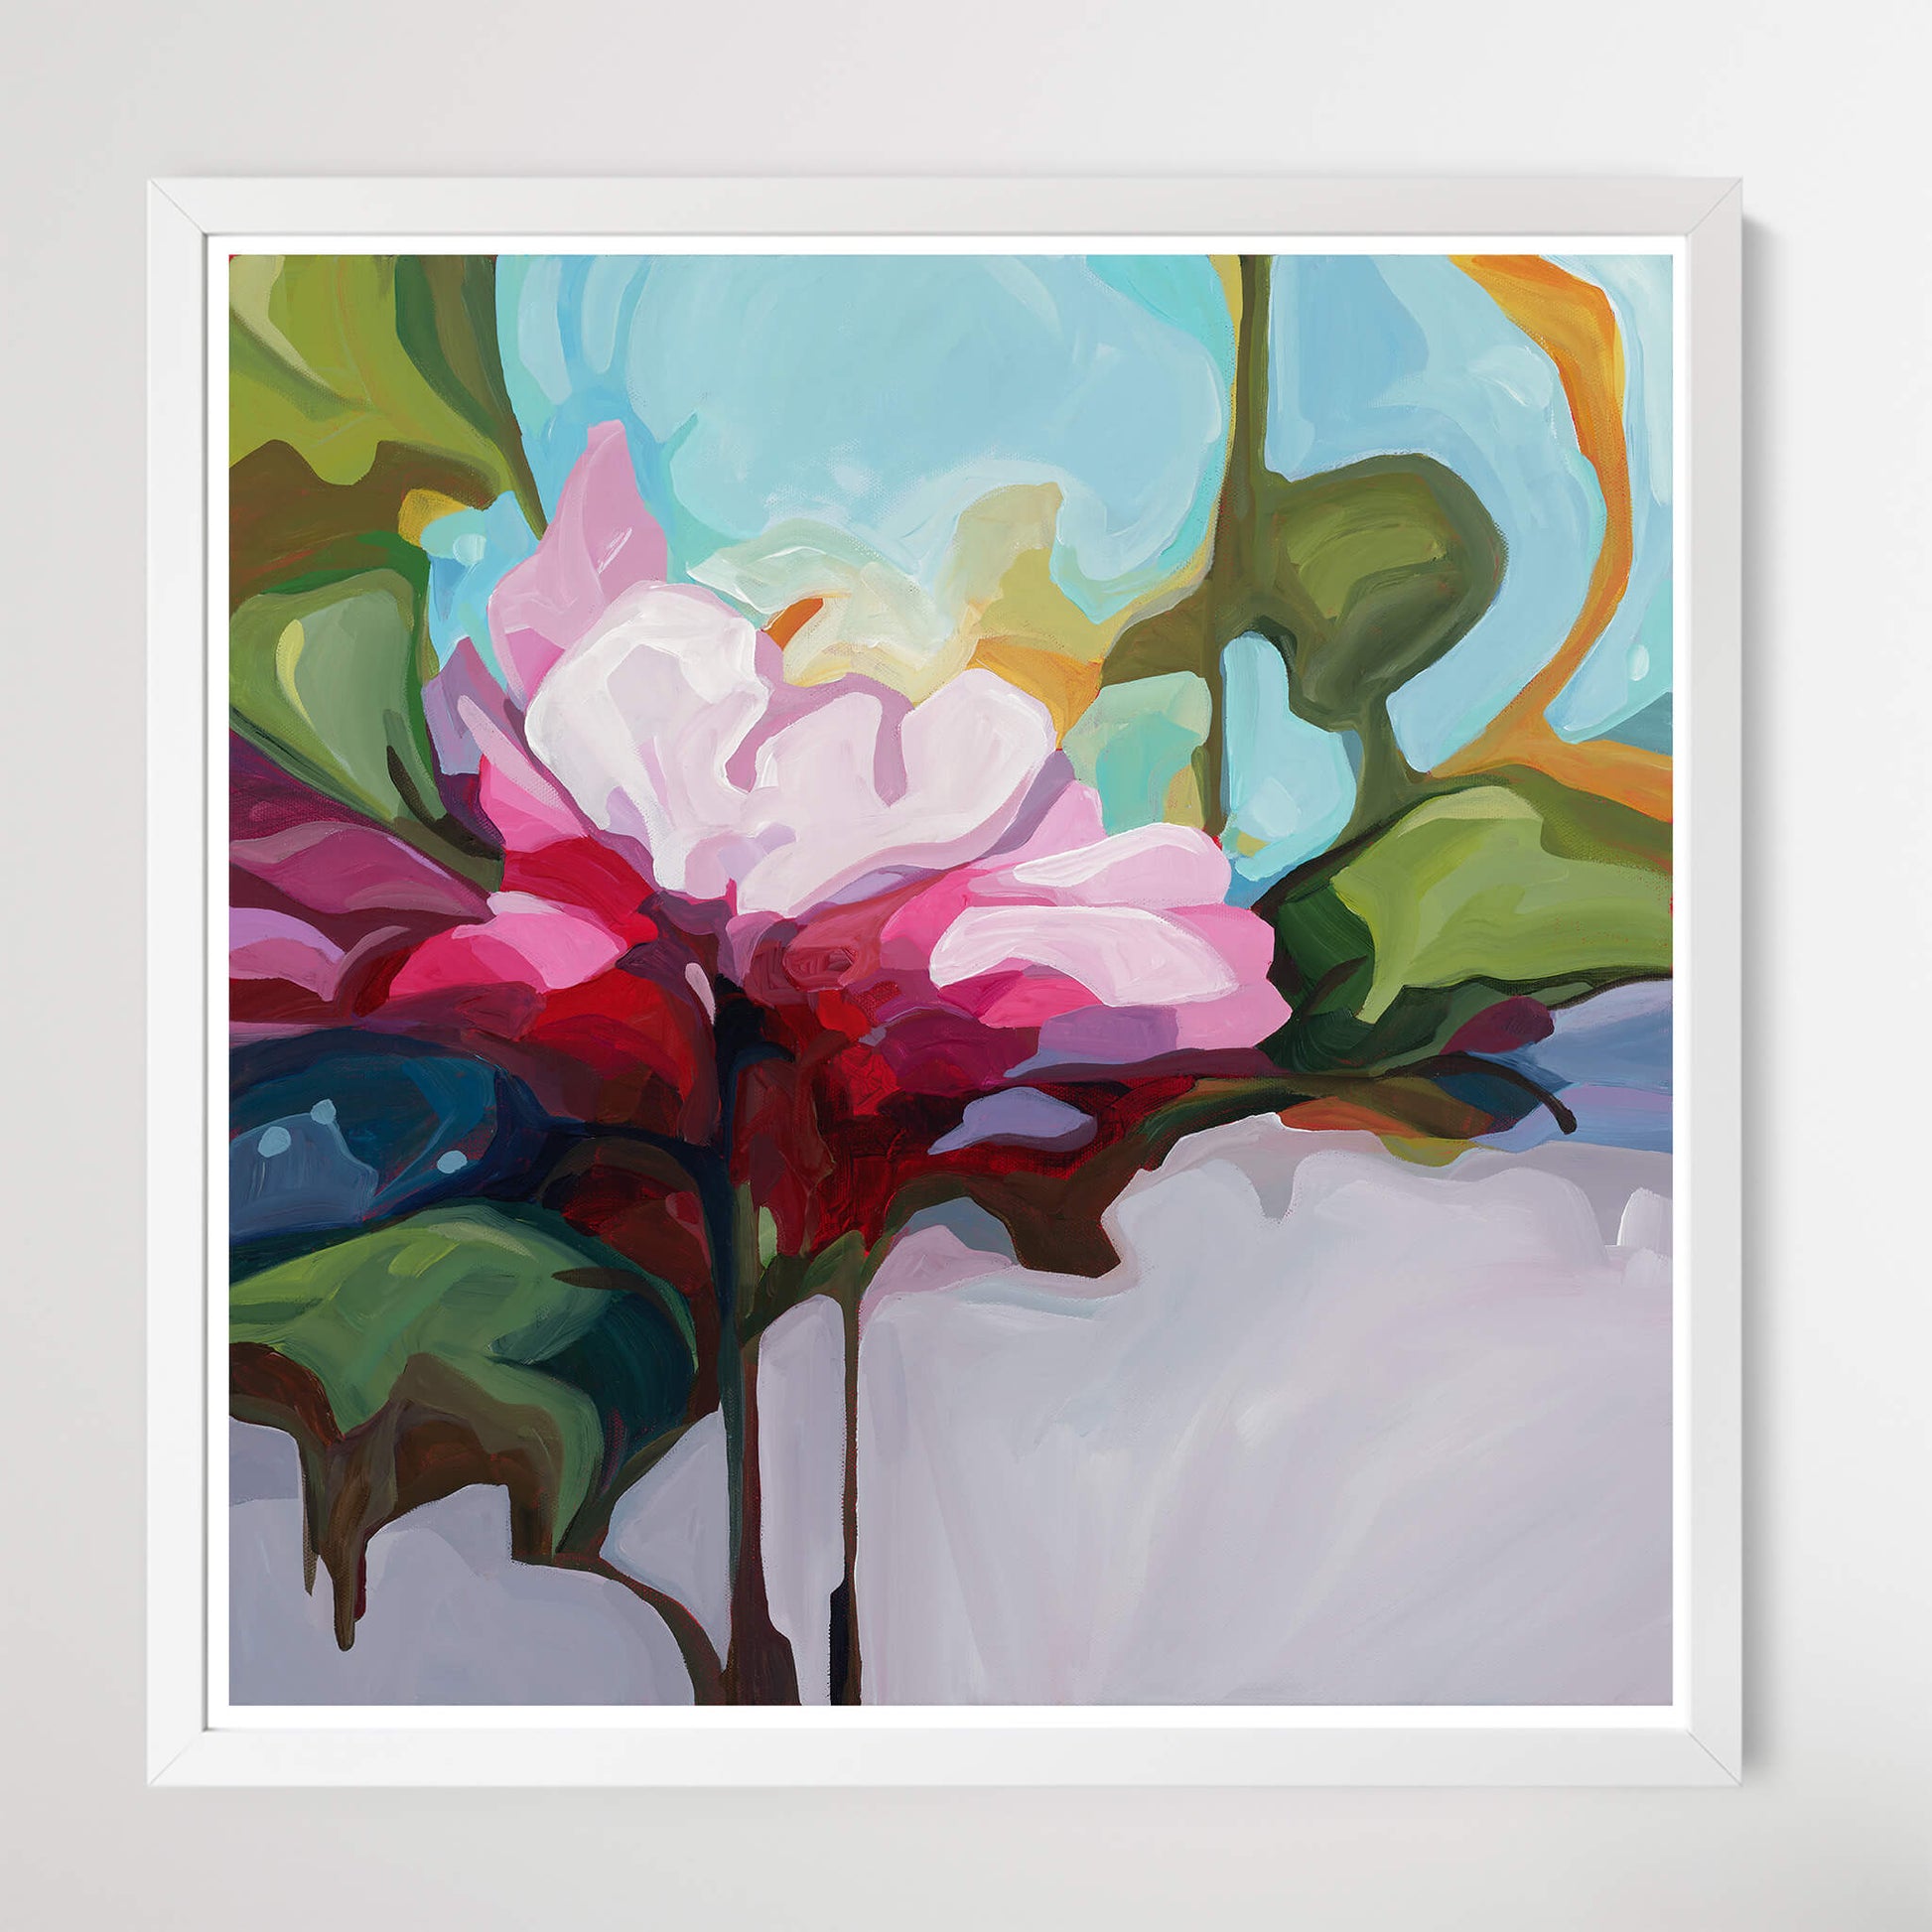 September Rose a fine art abstract floral print by Canadian artist Susannah Bleasby for people who love colourful wall art in their home decor and contemporary abstract floral design